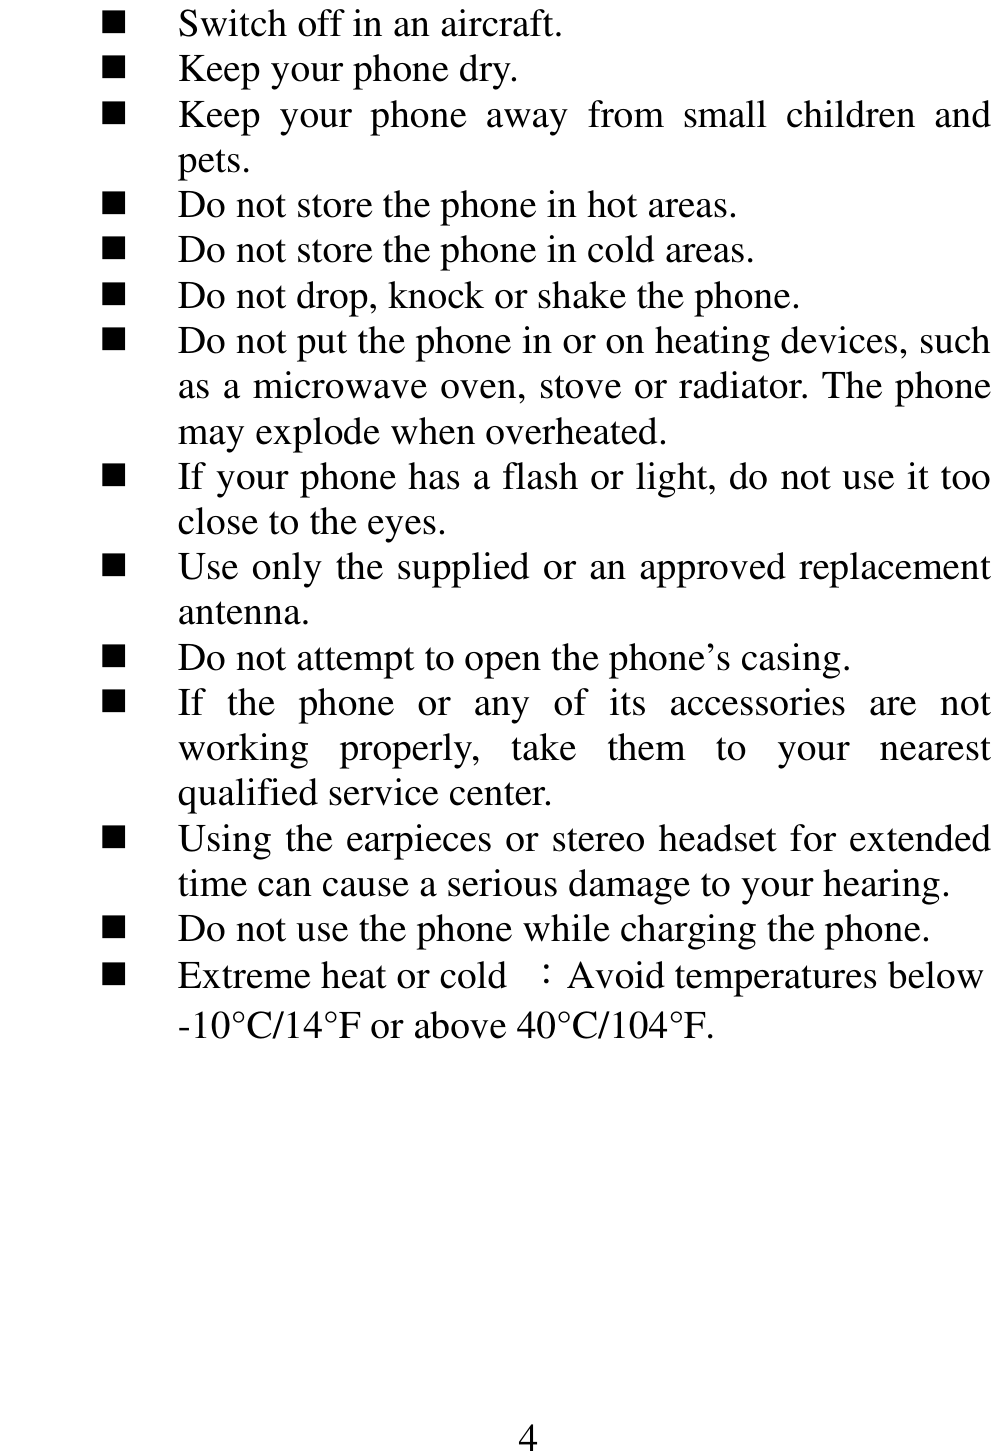                                                      4 Switch off in an aircraft.  Keep your phone dry.  Keep  your  phone  away  from  small  children  and pets.  Do not store the phone in hot areas.  Do not store the phone in cold areas.  Do not drop, knock or shake the phone.  Do not put the phone in or on heating devices, such as a microwave oven, stove or radiator. The phone may explode when overheated.  If your phone has a flash or light, do not use it too close to the eyes.  Use only the supplied or an approved replacement antenna.  Do not attempt to open the phone’s casing.  If  the  phone  or  any  of  its  accessories  are  not working  properly,  take  them  to  your  nearest qualified service center.  Using the earpieces or stereo headset for extended time can cause a serious damage to your hearing.  Do not use the phone while charging the phone.  Extreme heat or cold  ：Avoid temperatures below -10°C/14°F or above 40°C/104°F.     